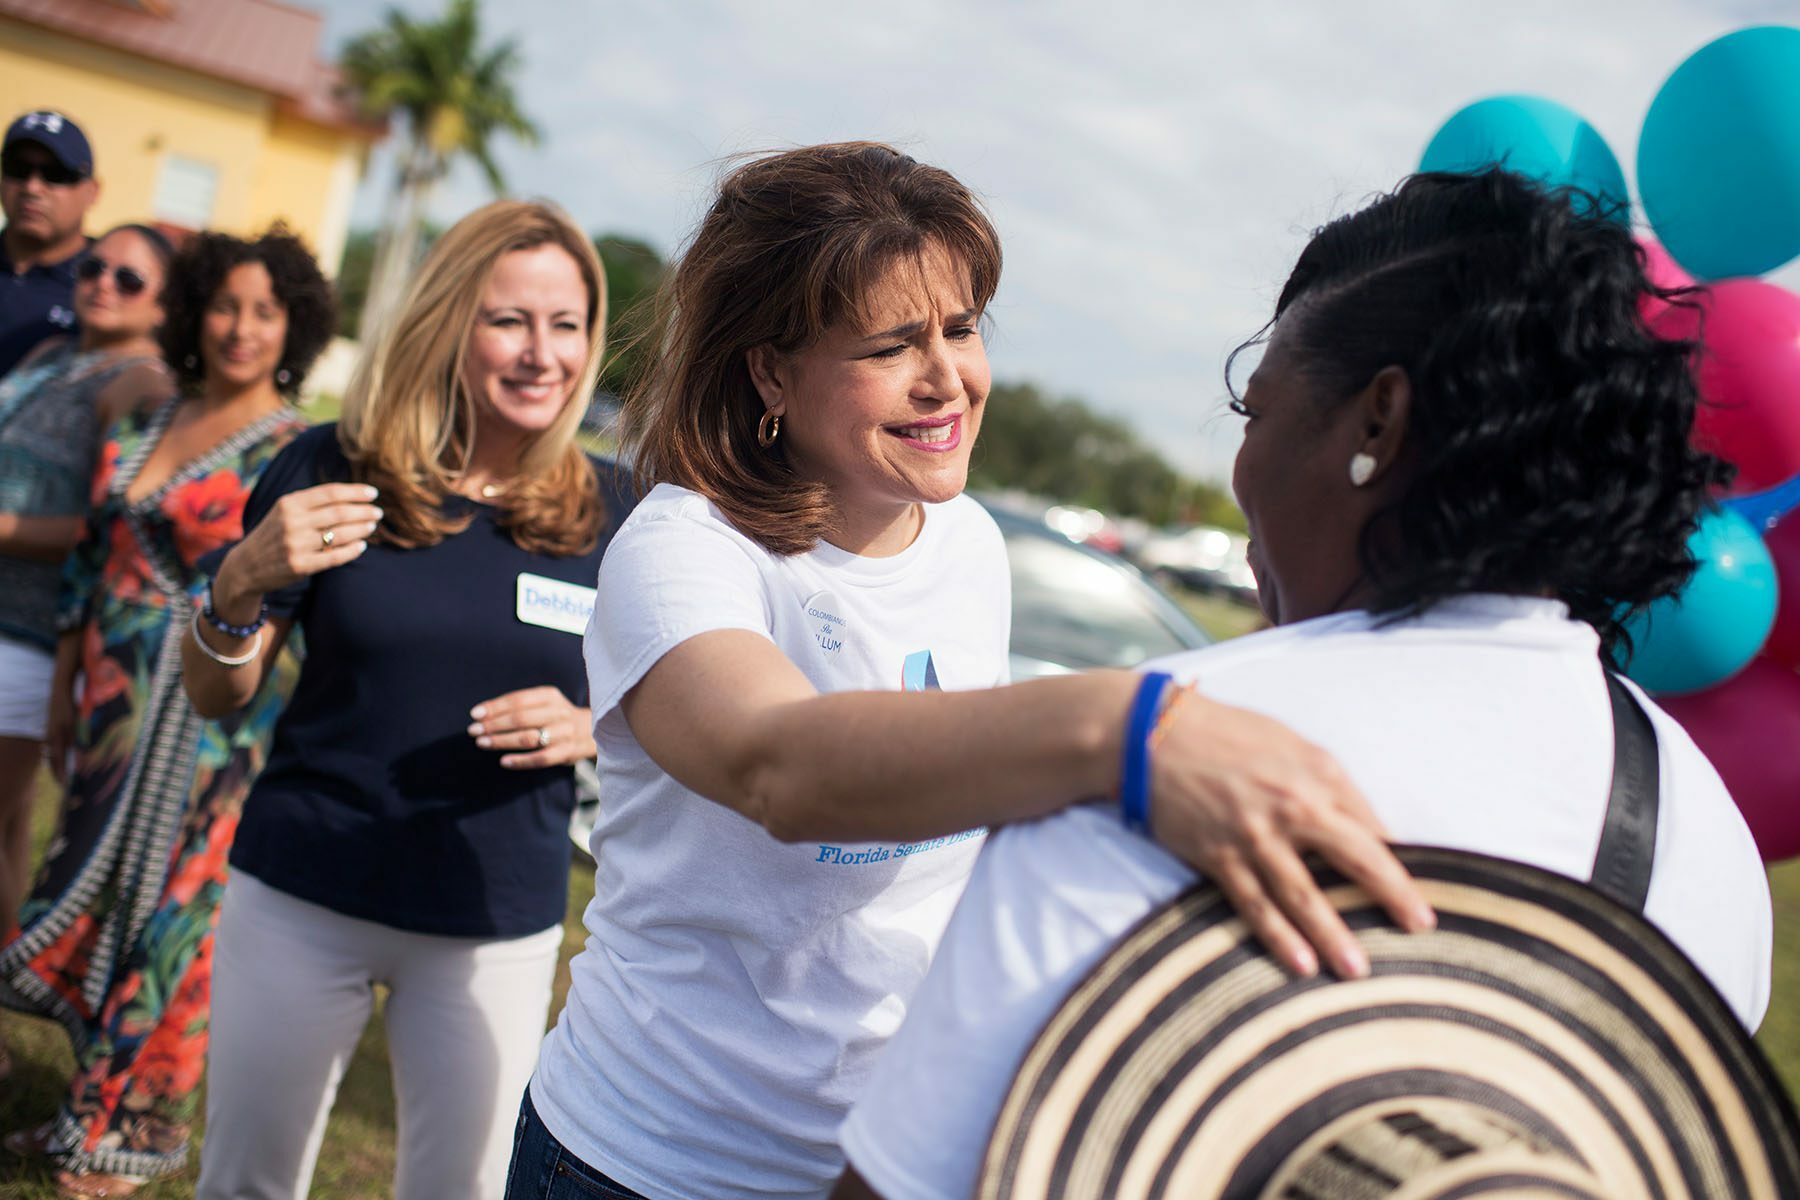 Annette Taddeo smiles as she speaks to a supporter.